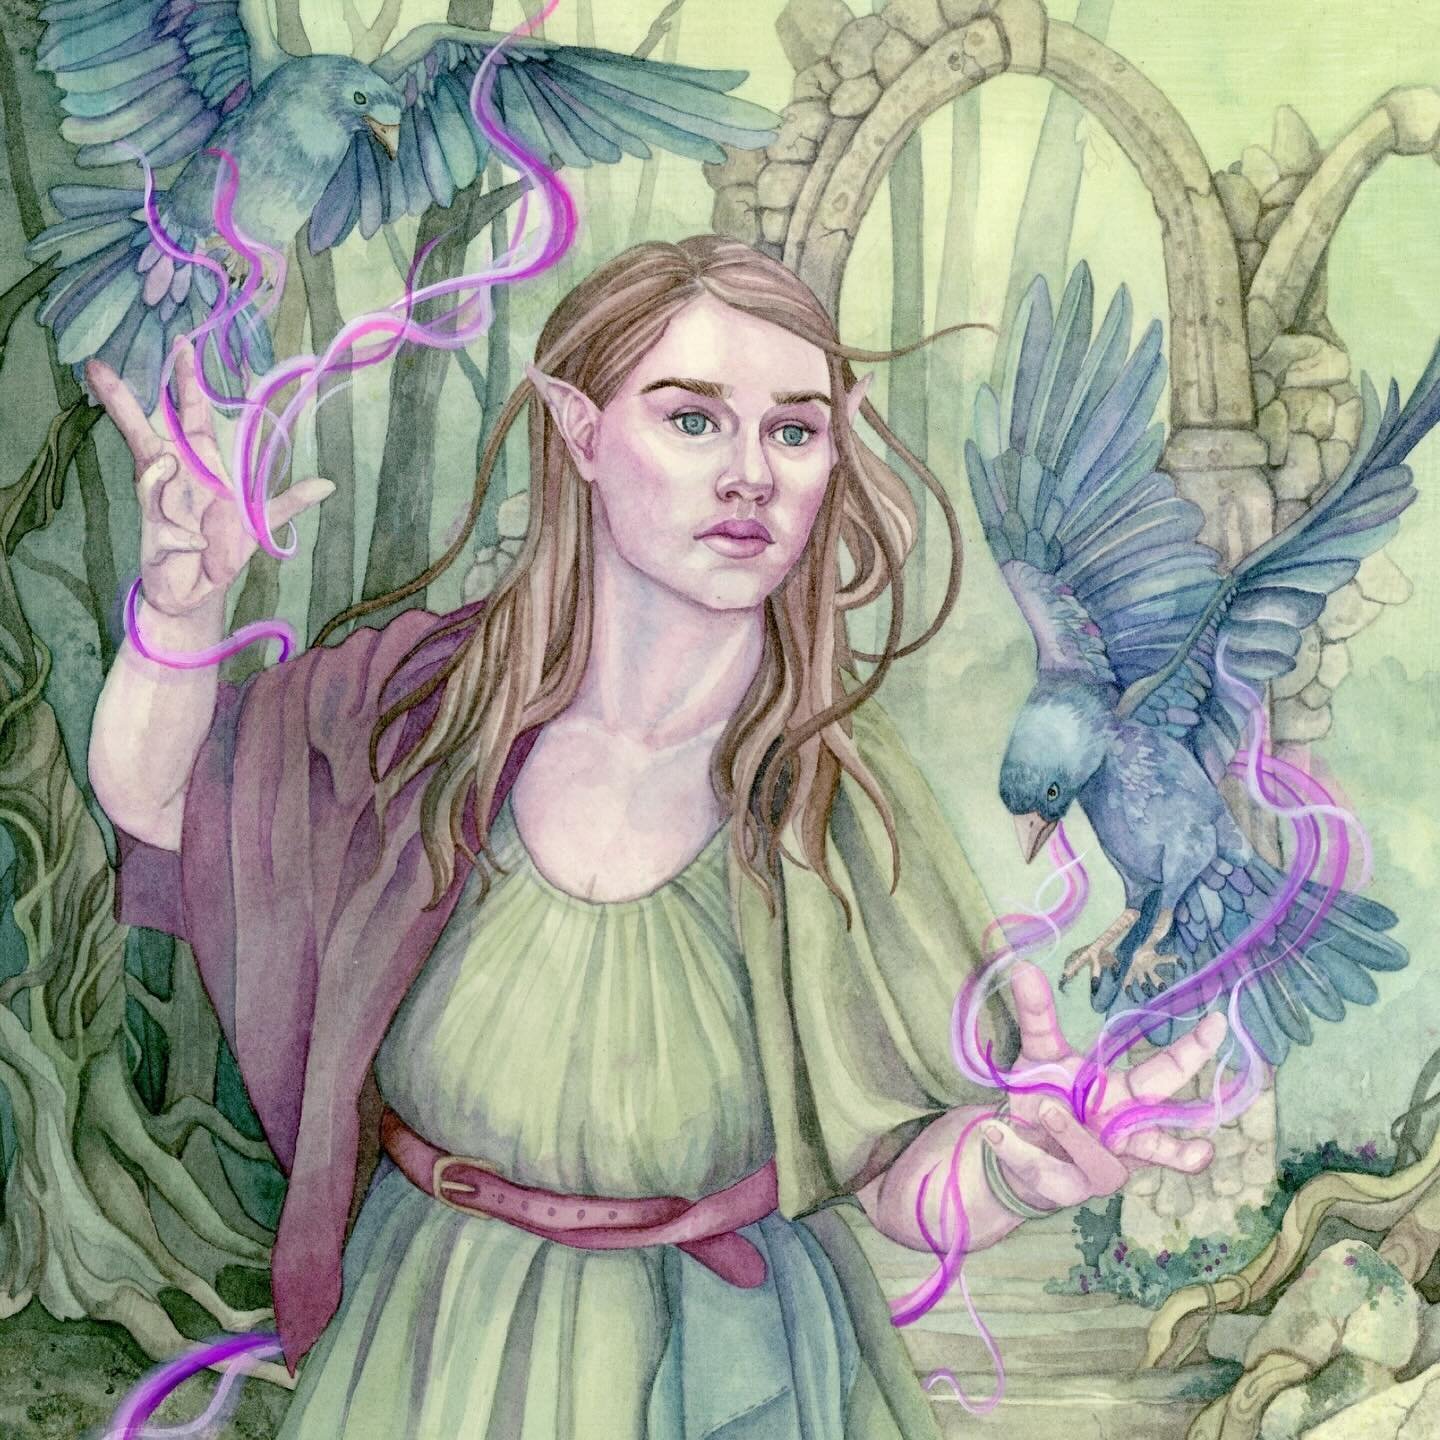 Here is a look back at &ldquo;Call of the Messengers&rdquo; 🐦&zwj;⬛ 🔮 a watercolor illustration done for  a group show called &ldquo;Between Spellbook Pages&rdquo;✨This theme really helped me branch out and create an illustration that I&rsquo;m sti